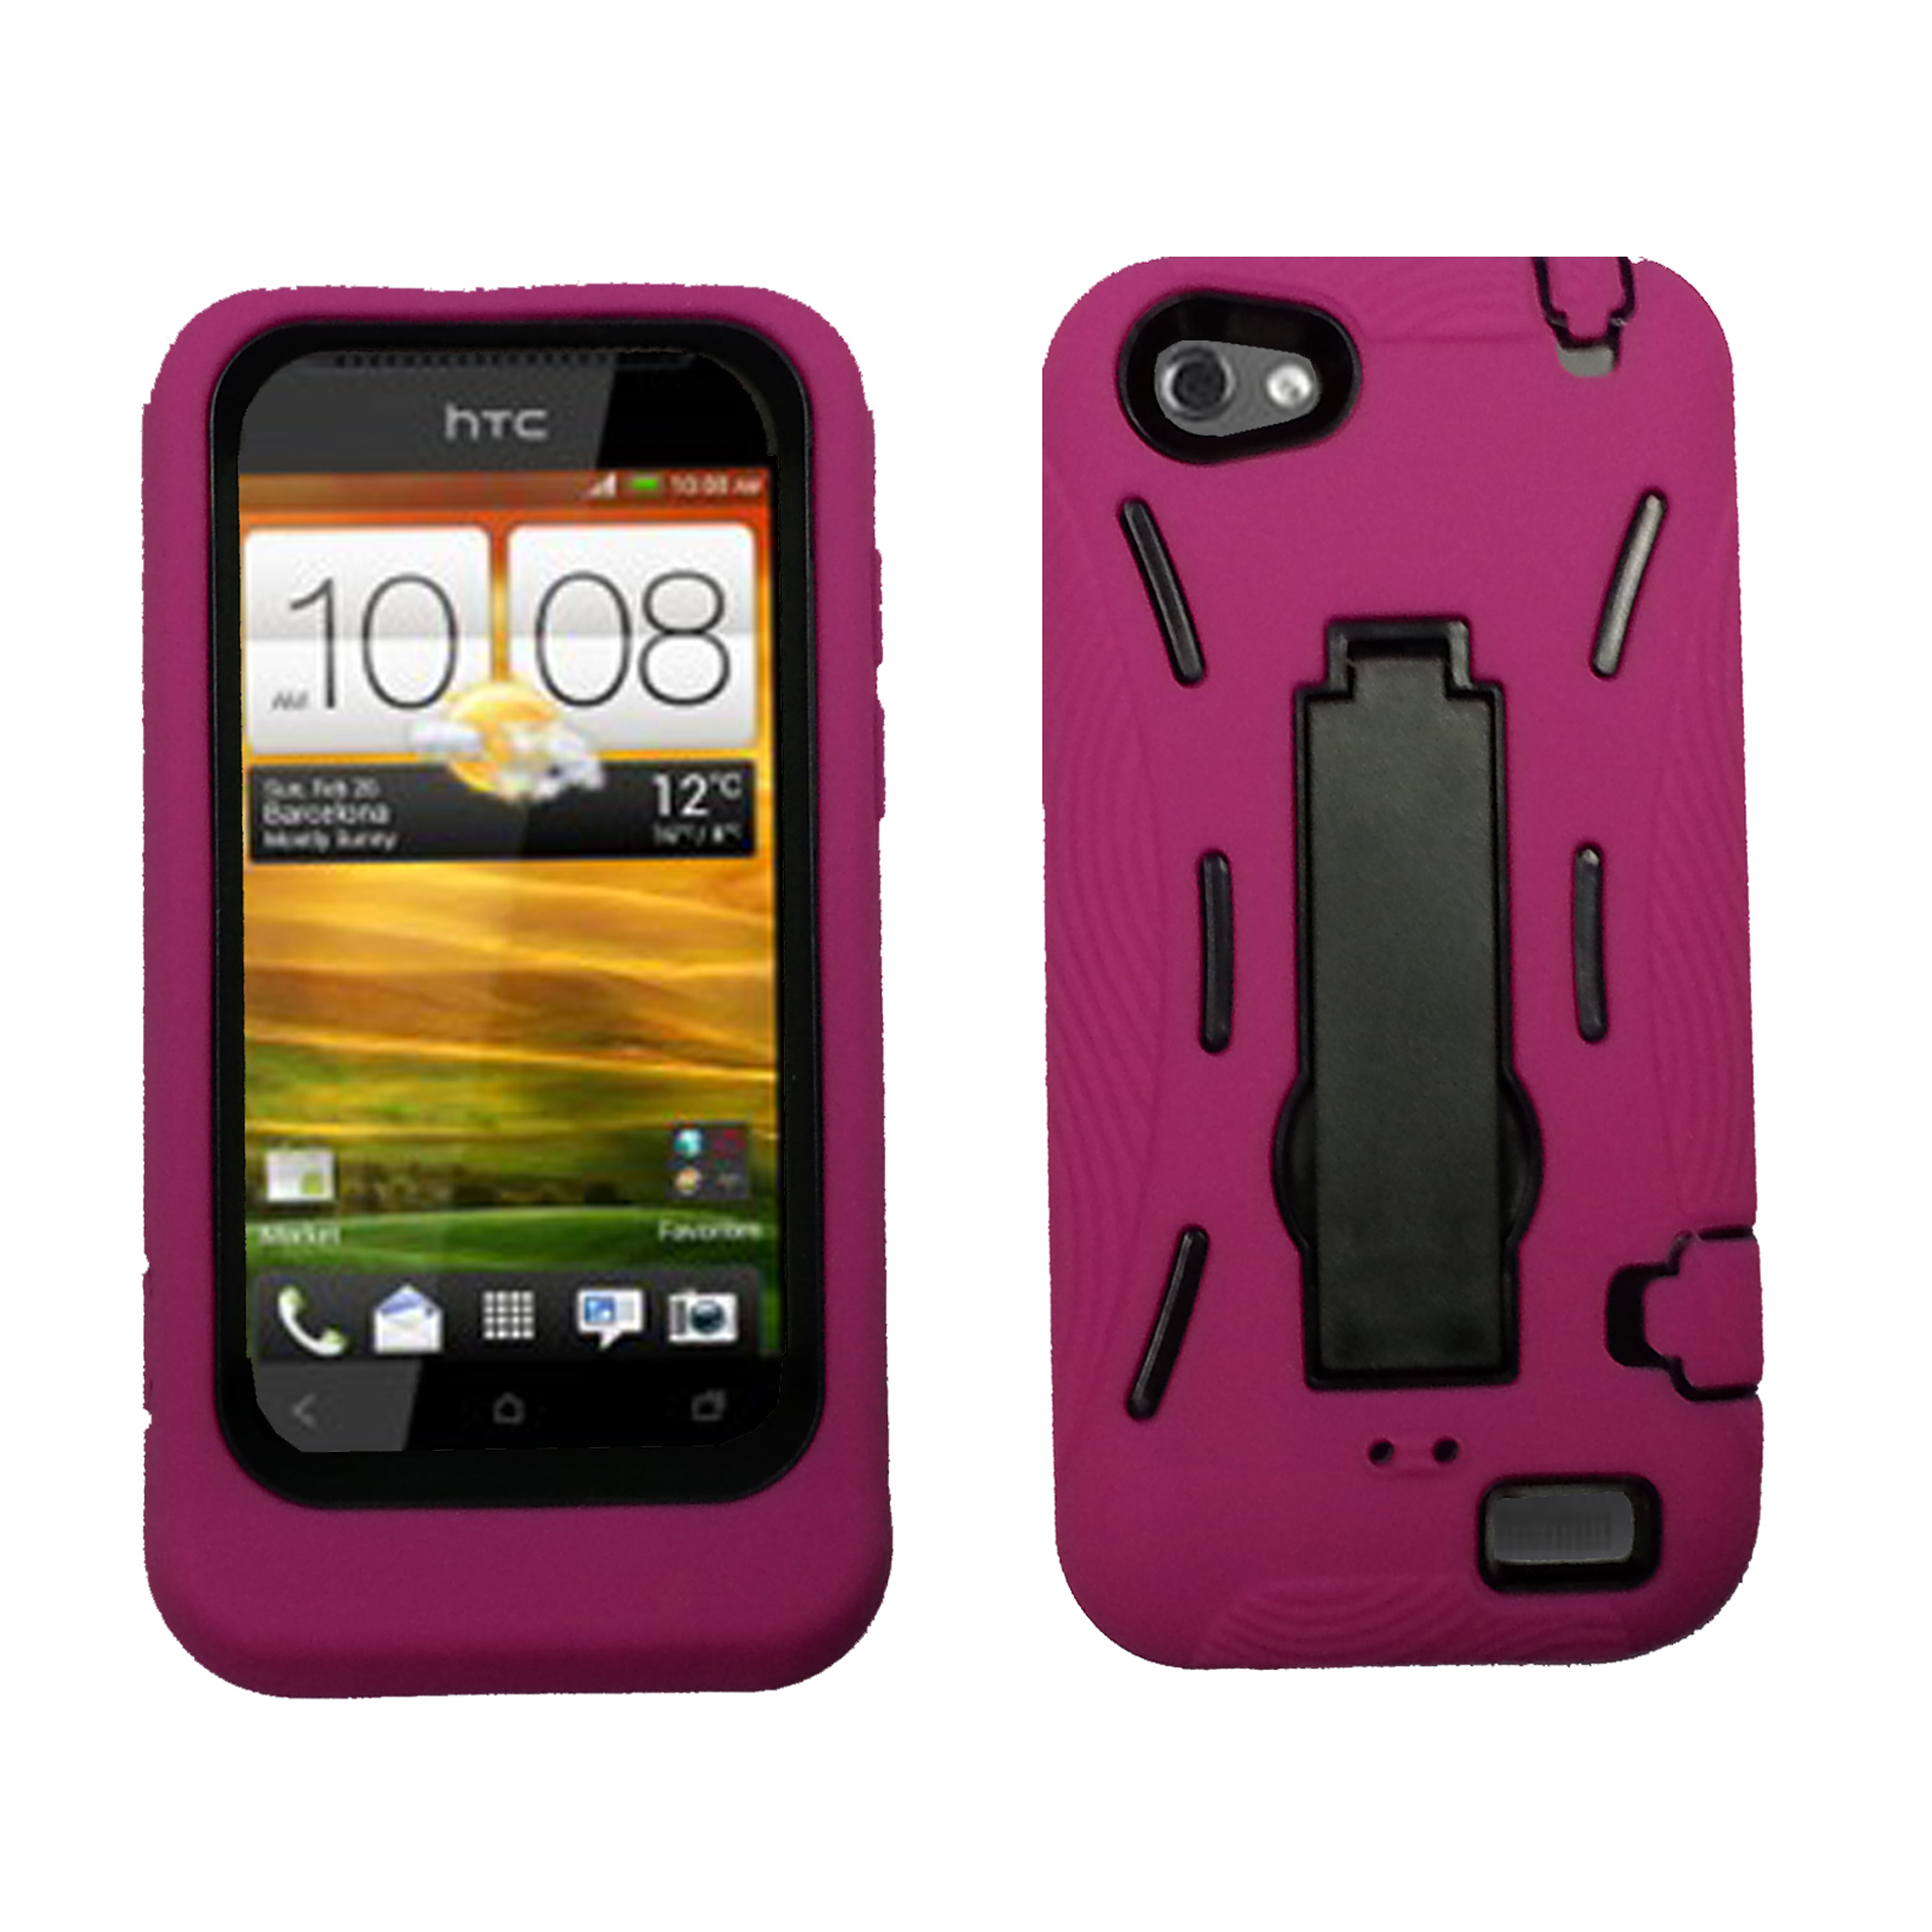 Robot defender case Silicone+PC Anti Impact Hybrid Case Kickstand shell For HTC One V Pink Black